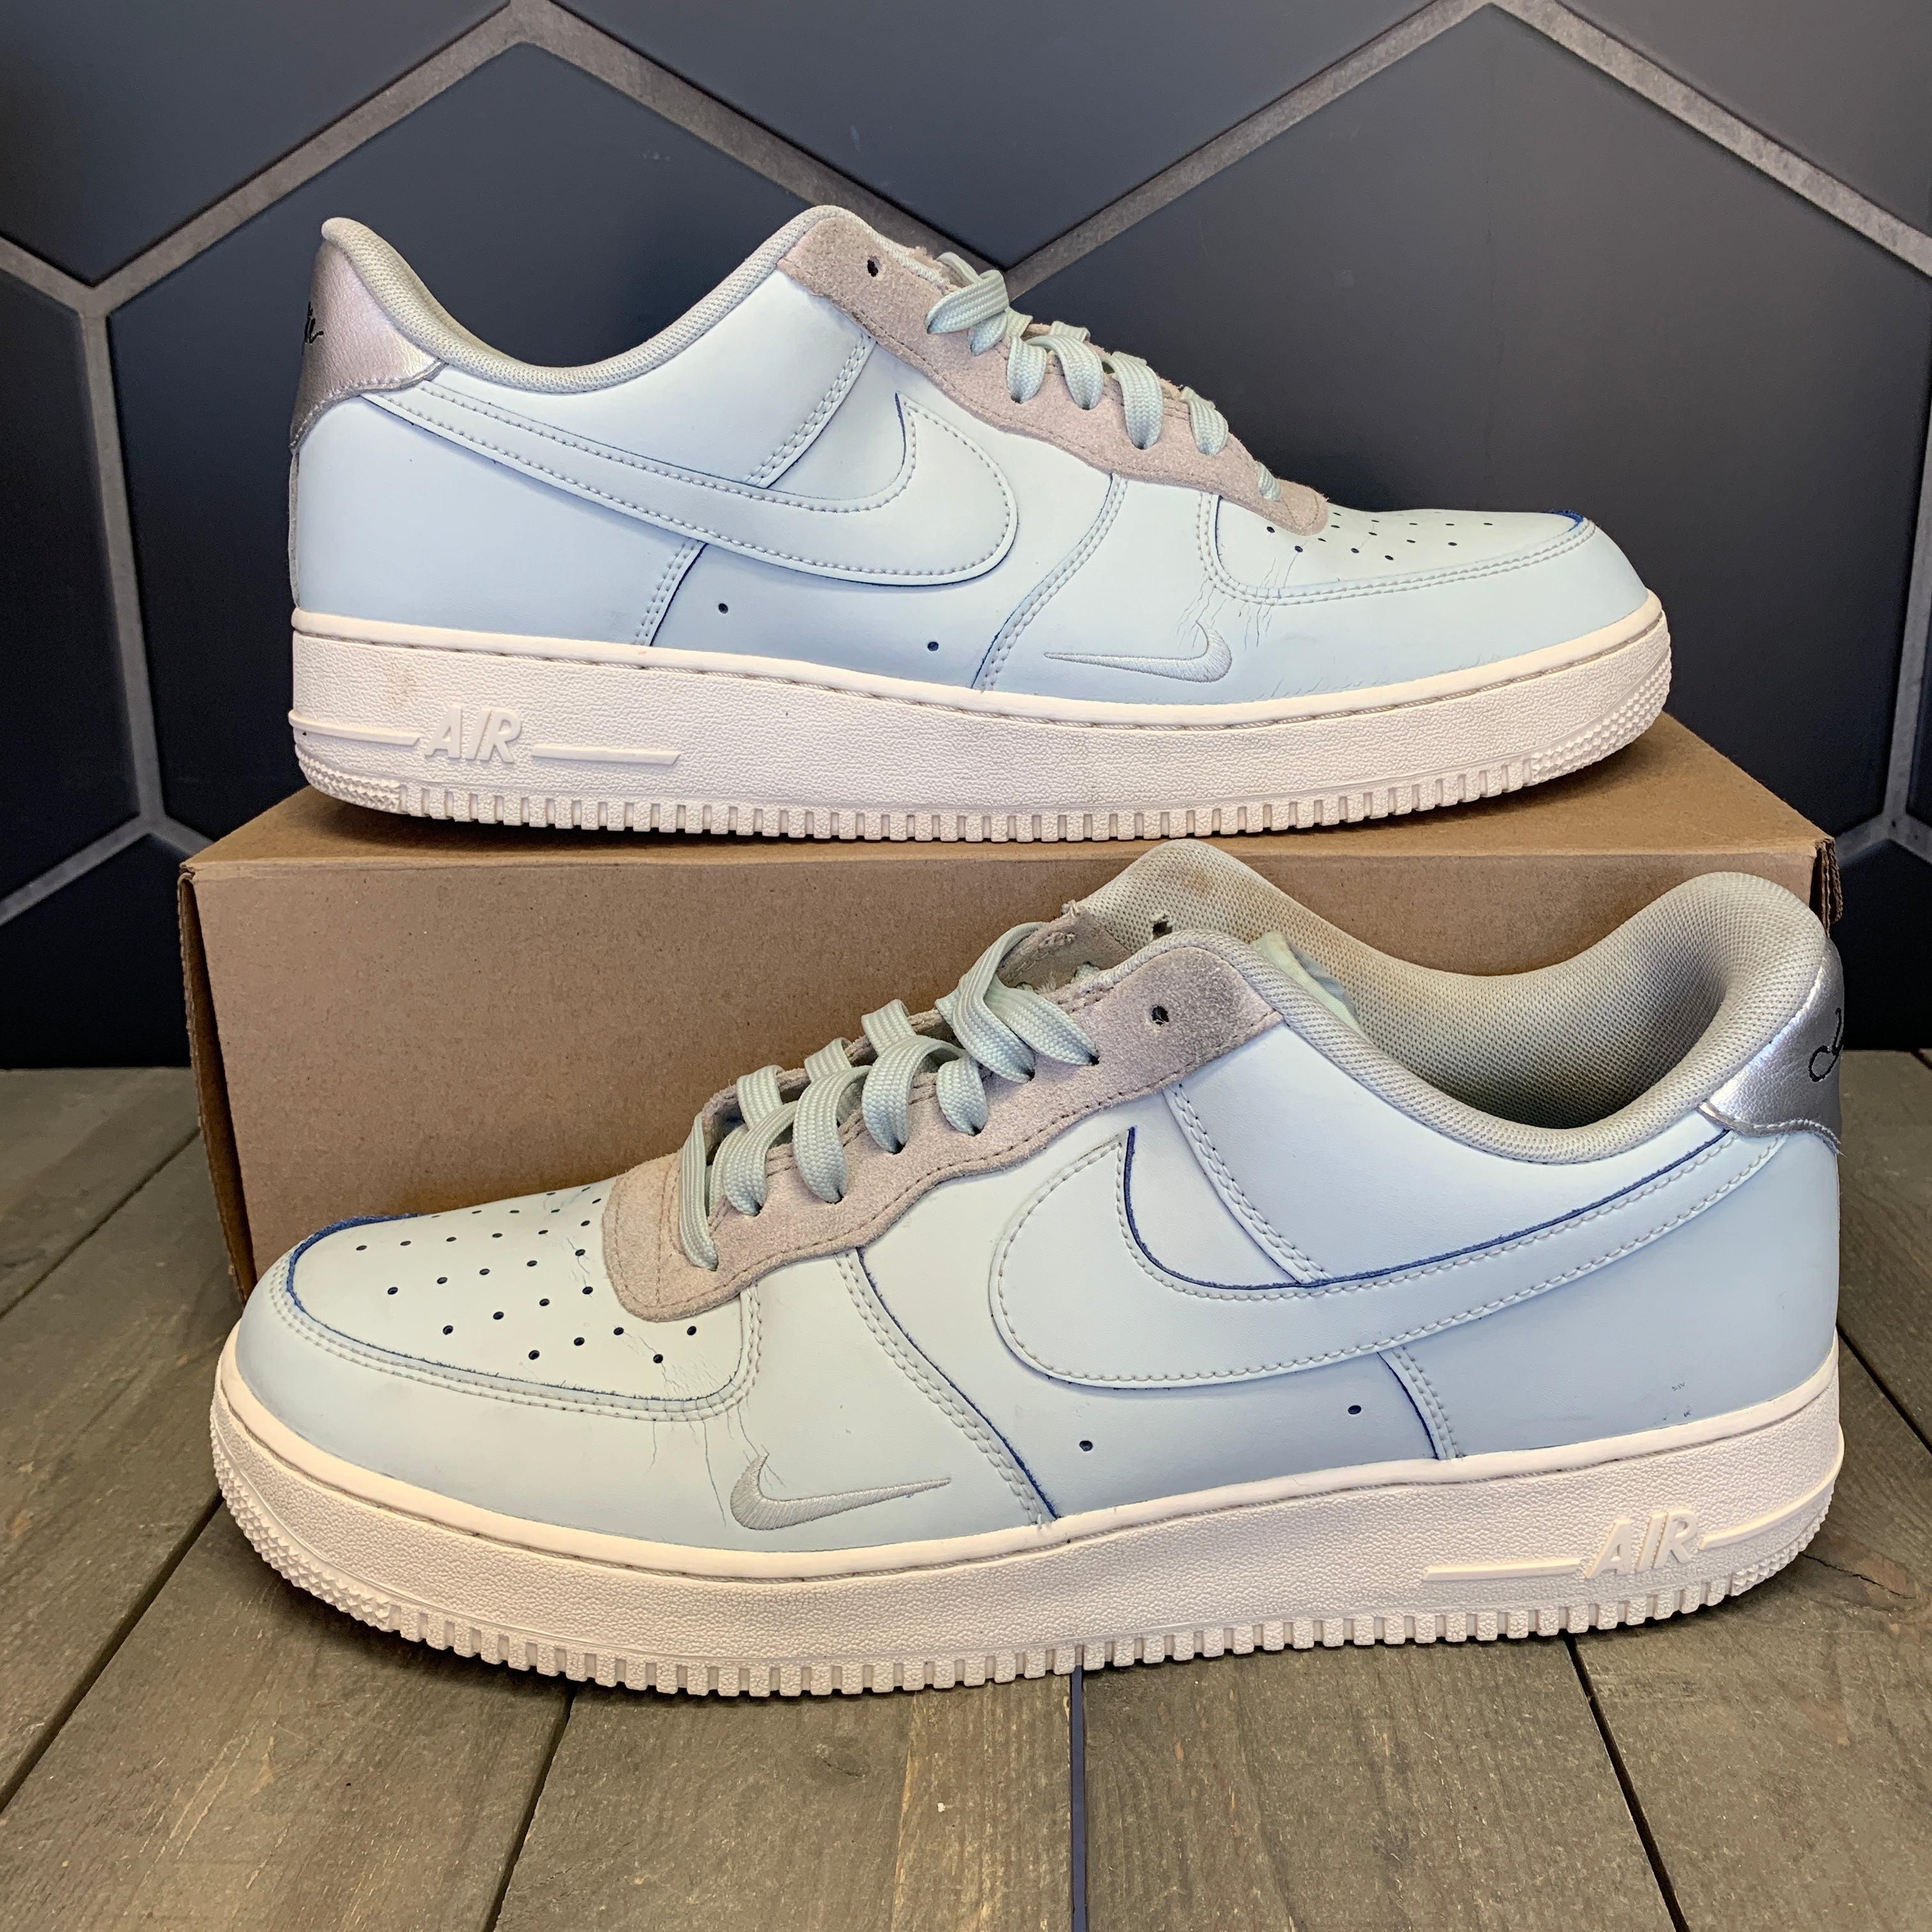 devin booker air force 1 for sale